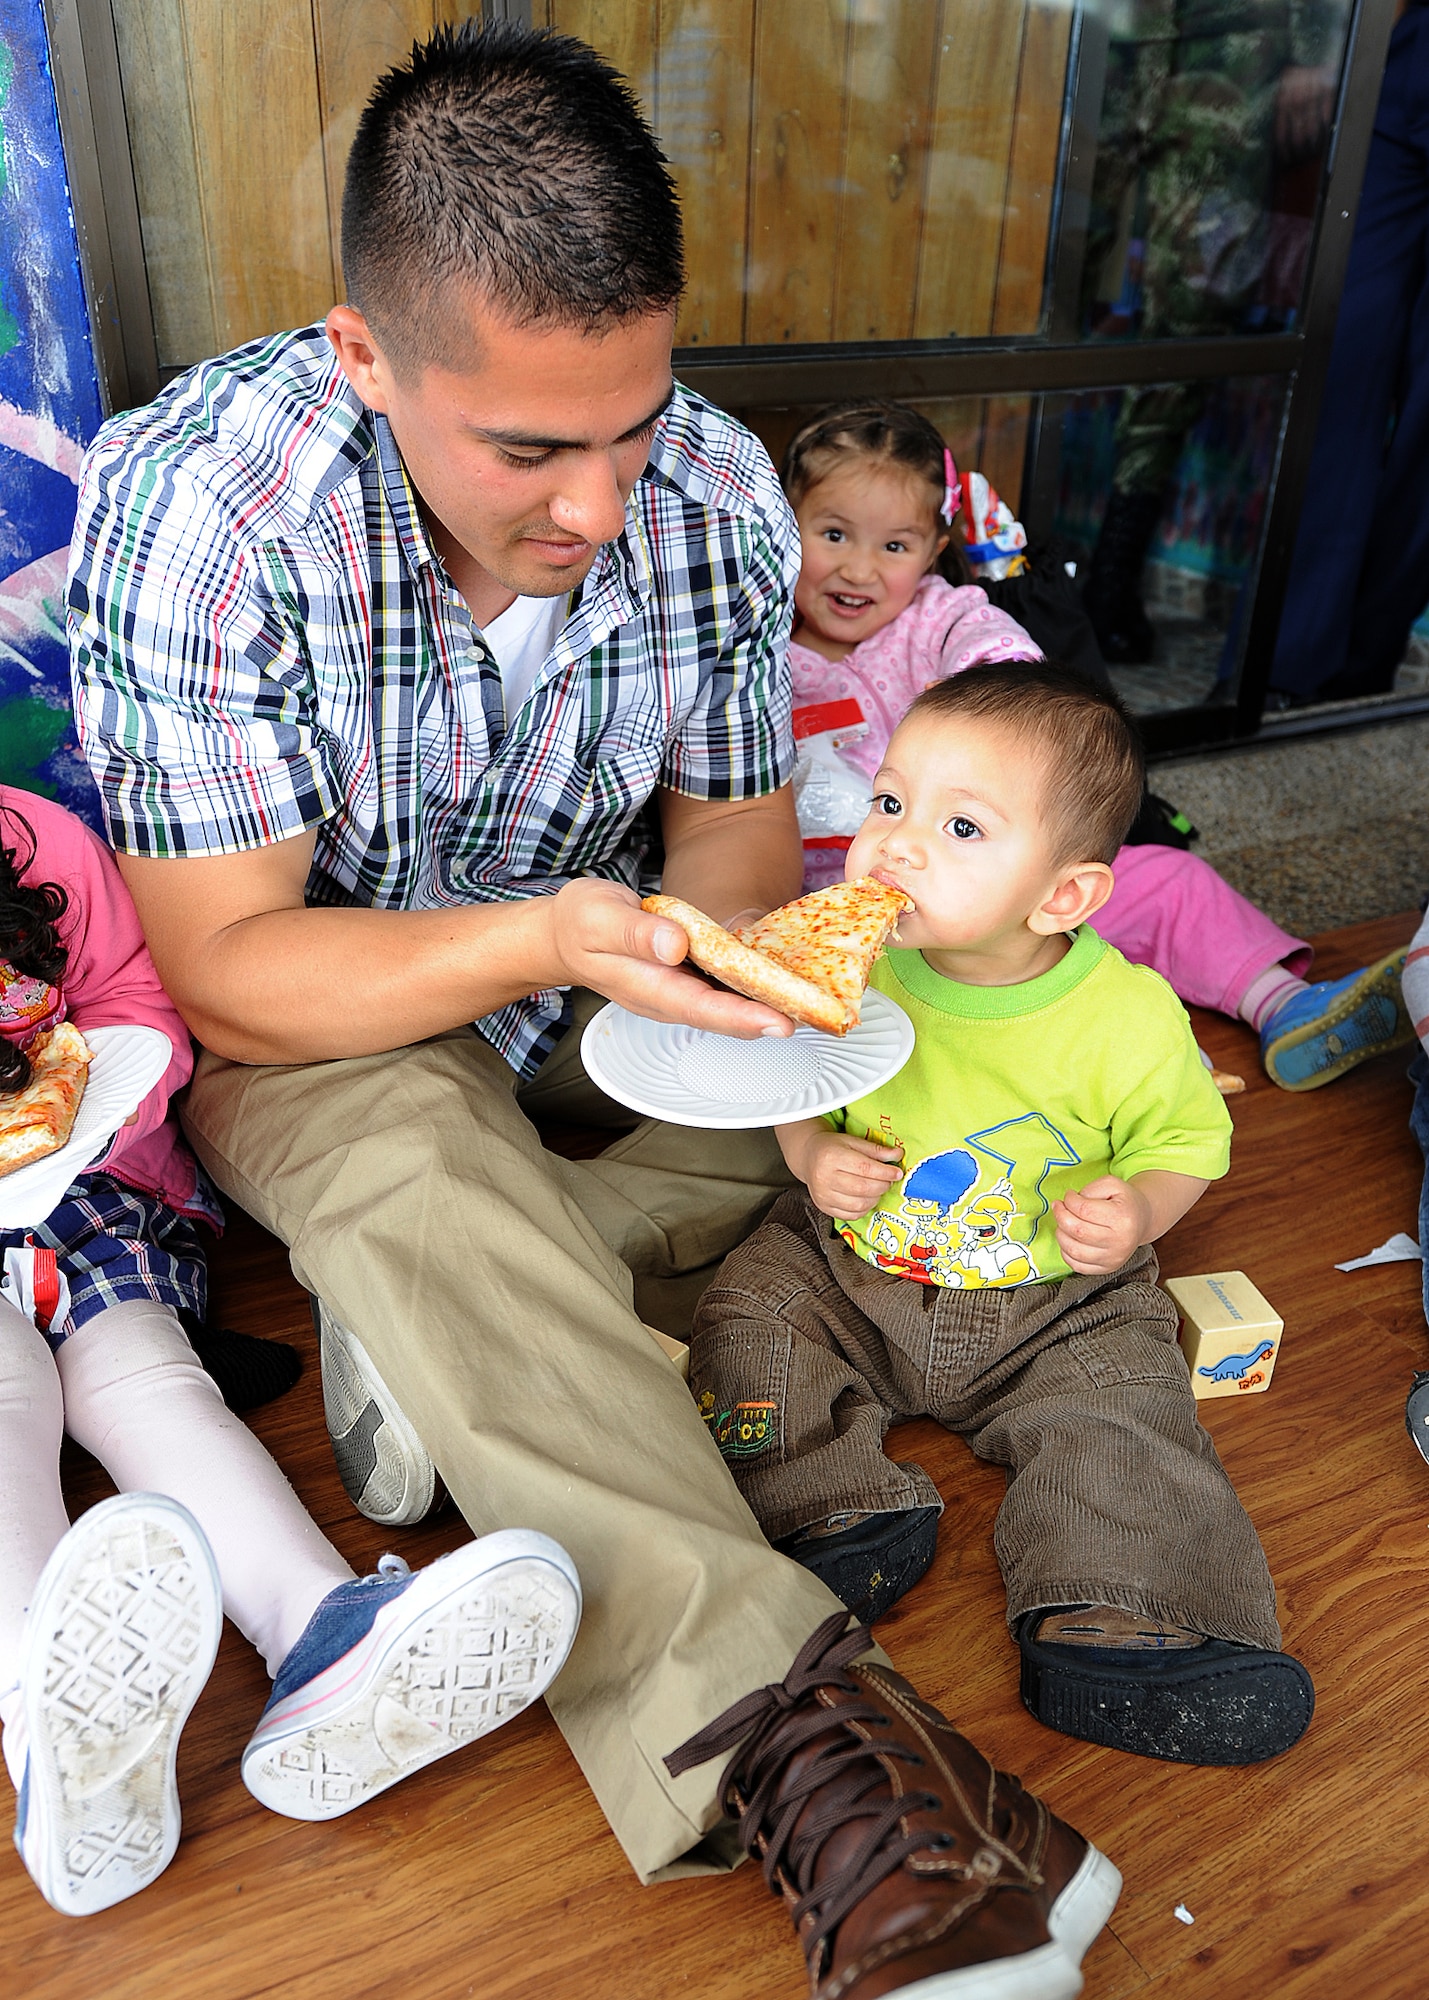 Staff Sgt. Peter Salinas, 571st Mobility Support Advisory Squadron air advisor, feeds pizza to one of the children from the Asociación Amigos del Niño Ayudame, Bogota, Colombia June 9 as part of an Air Mobility Command Building Partner Capacity month-long mission.  Members of the Colombian air force, Inter-American Air Forces Academy and 12th Air Force (Air Forces Southern) also participated in the visit and donated toys, clothes and books to the children.  (U.S. Air Force photo by Tech. Sgt. Lesley Waters)